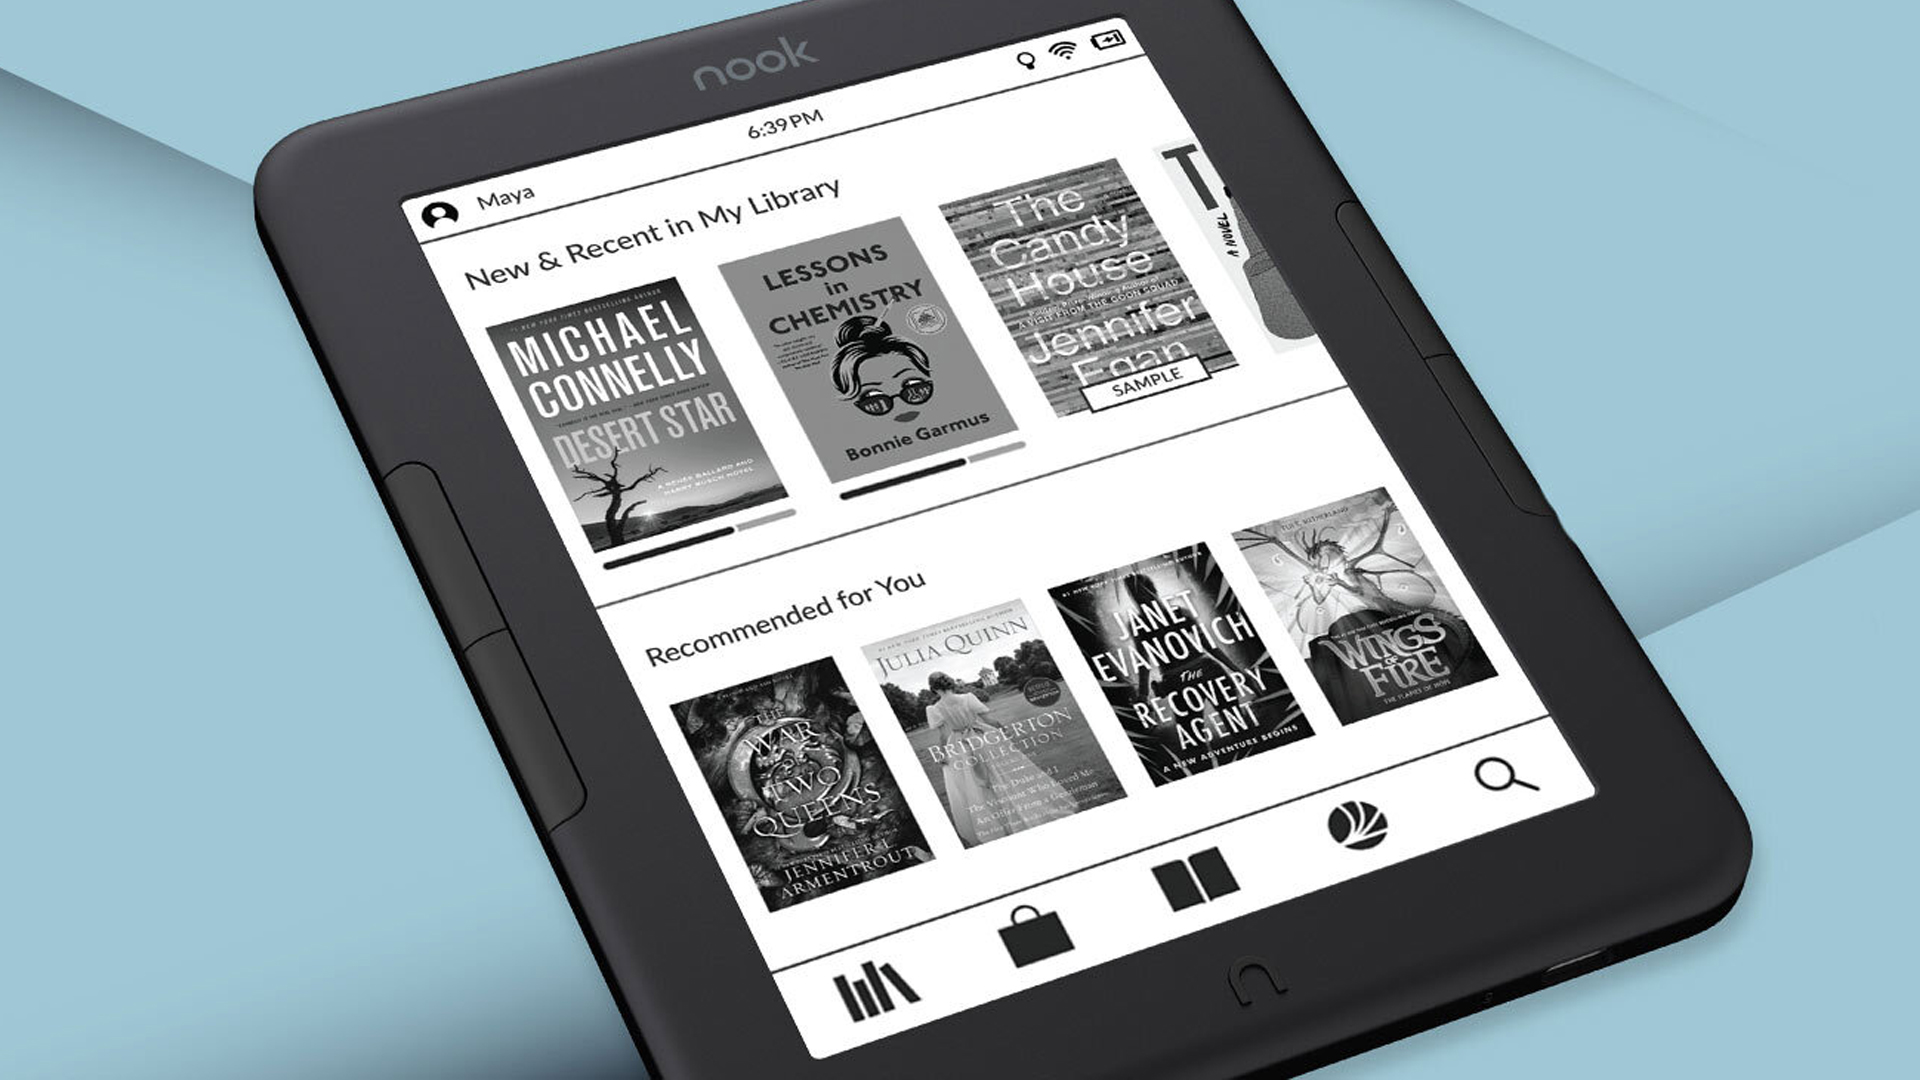 Barnes & Noble's new Nook ereader is cheaper but with tradeoffs TechRadar